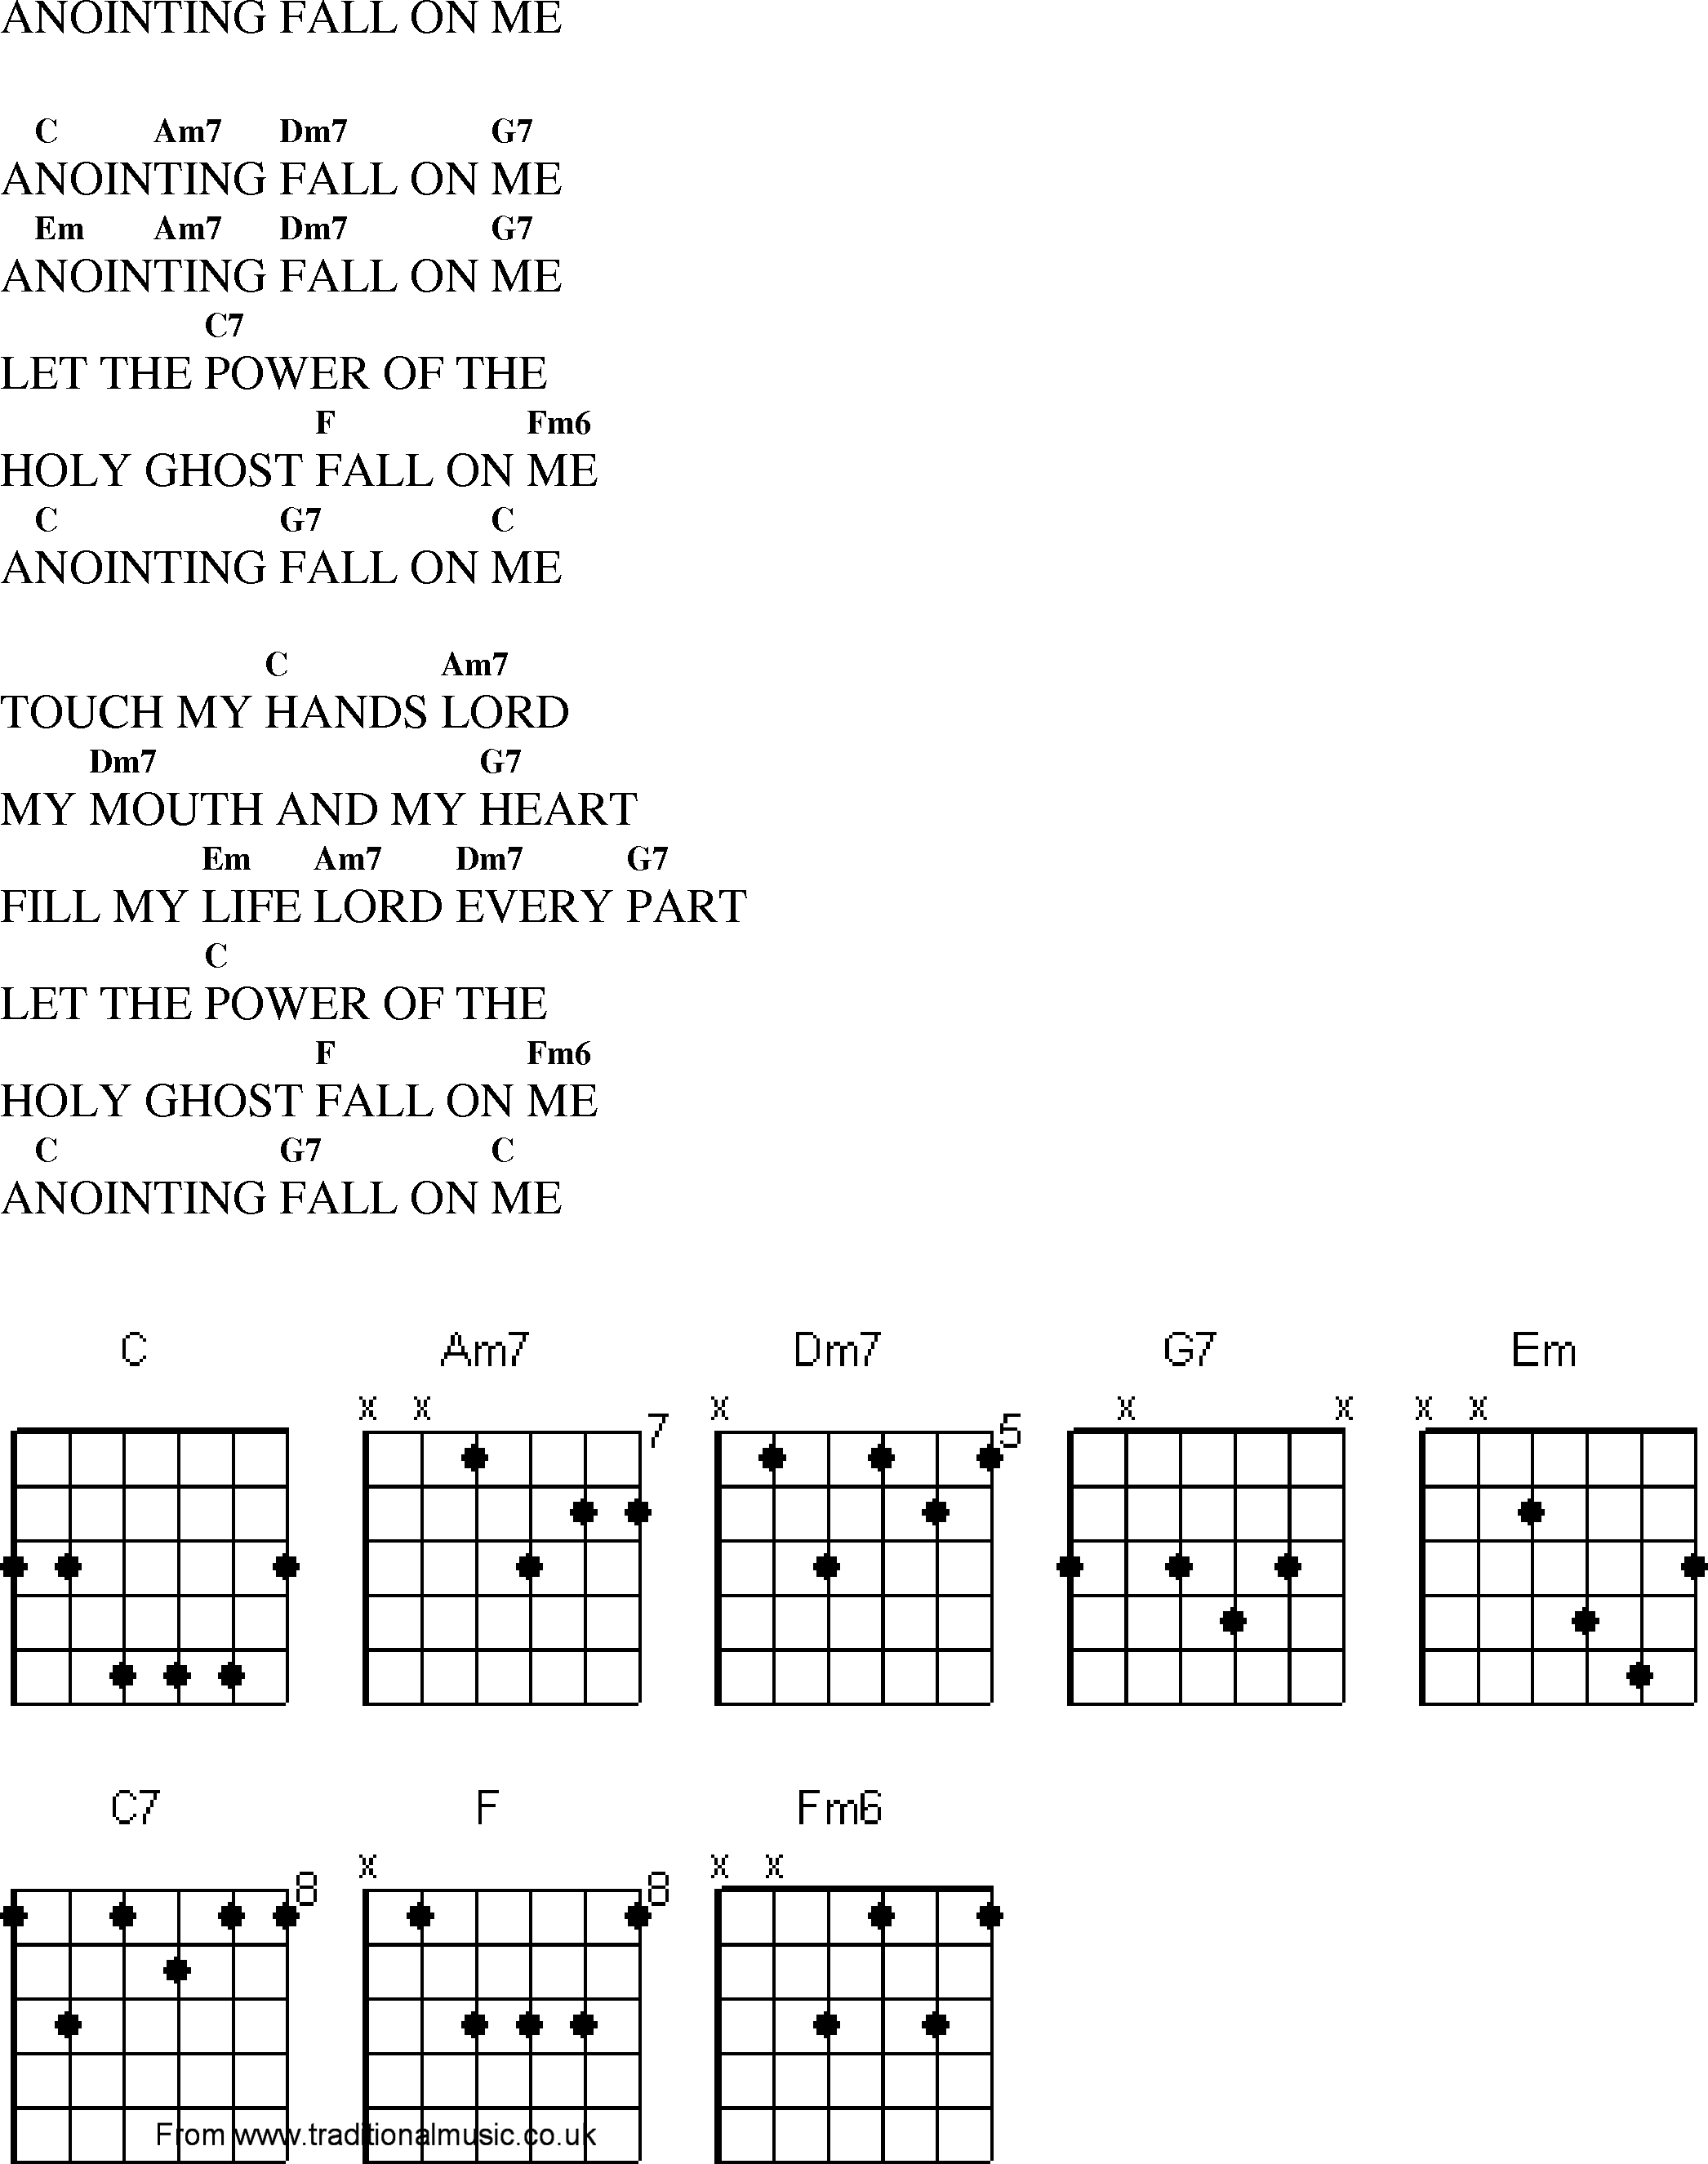 Gospel Song: anointing_fall_on_me, lyrics and chords.